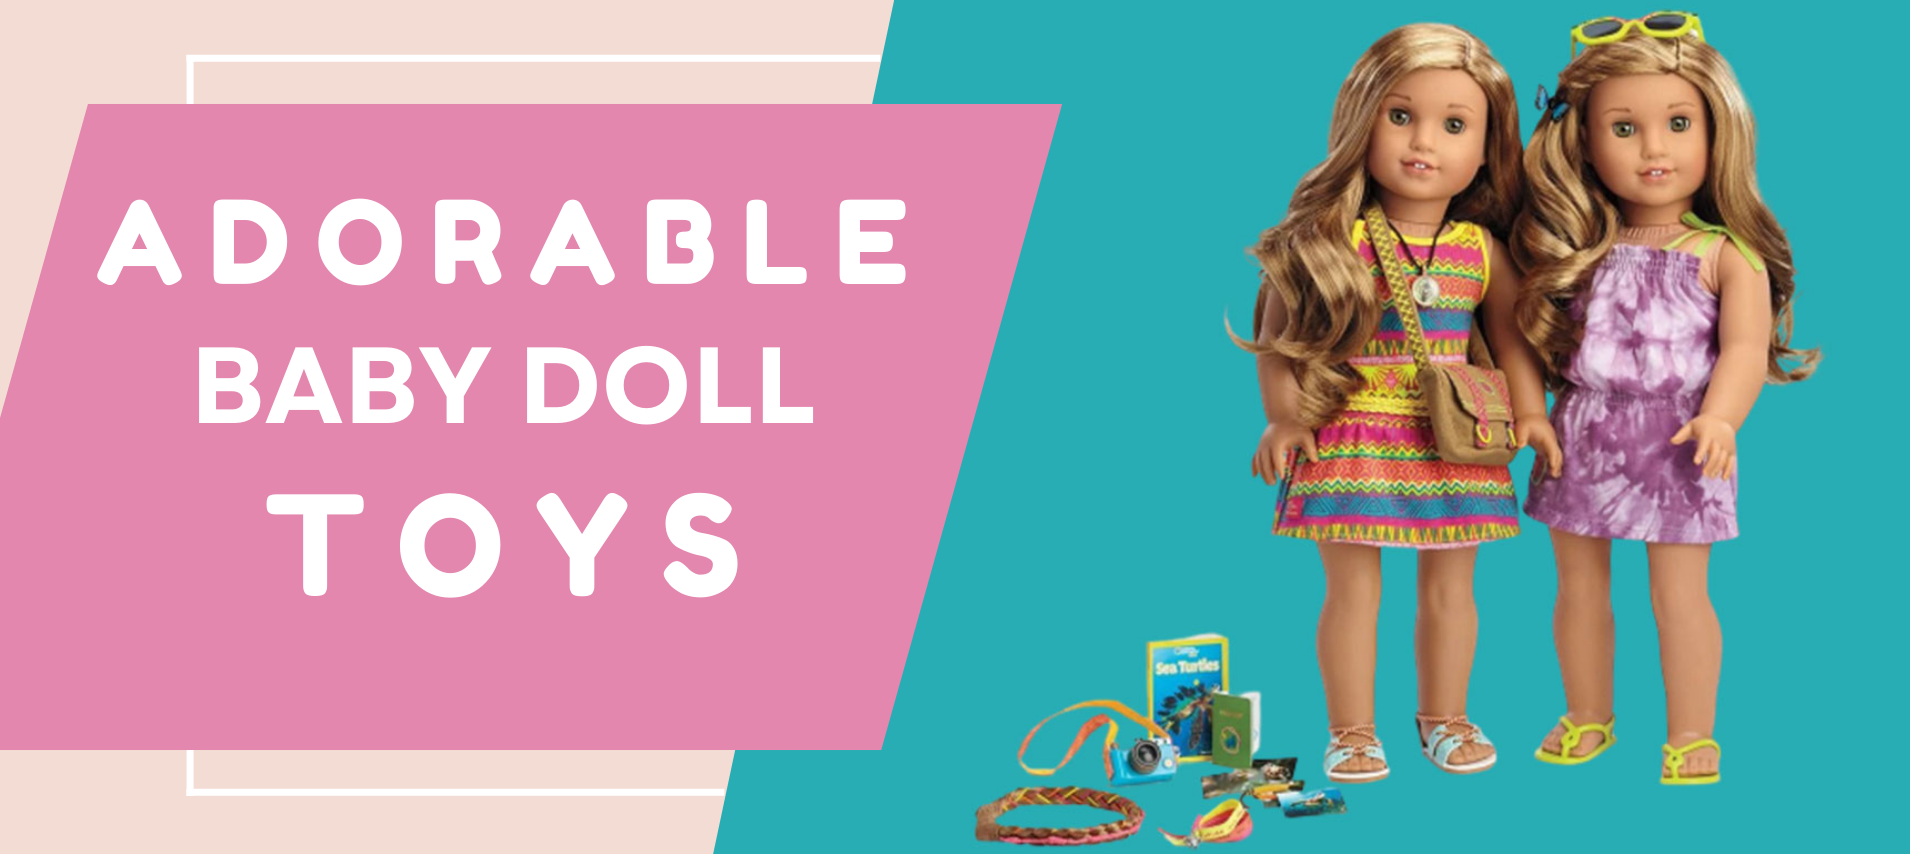 Baby Doll Toys |sale- upto 22% off |start from RS 350/-